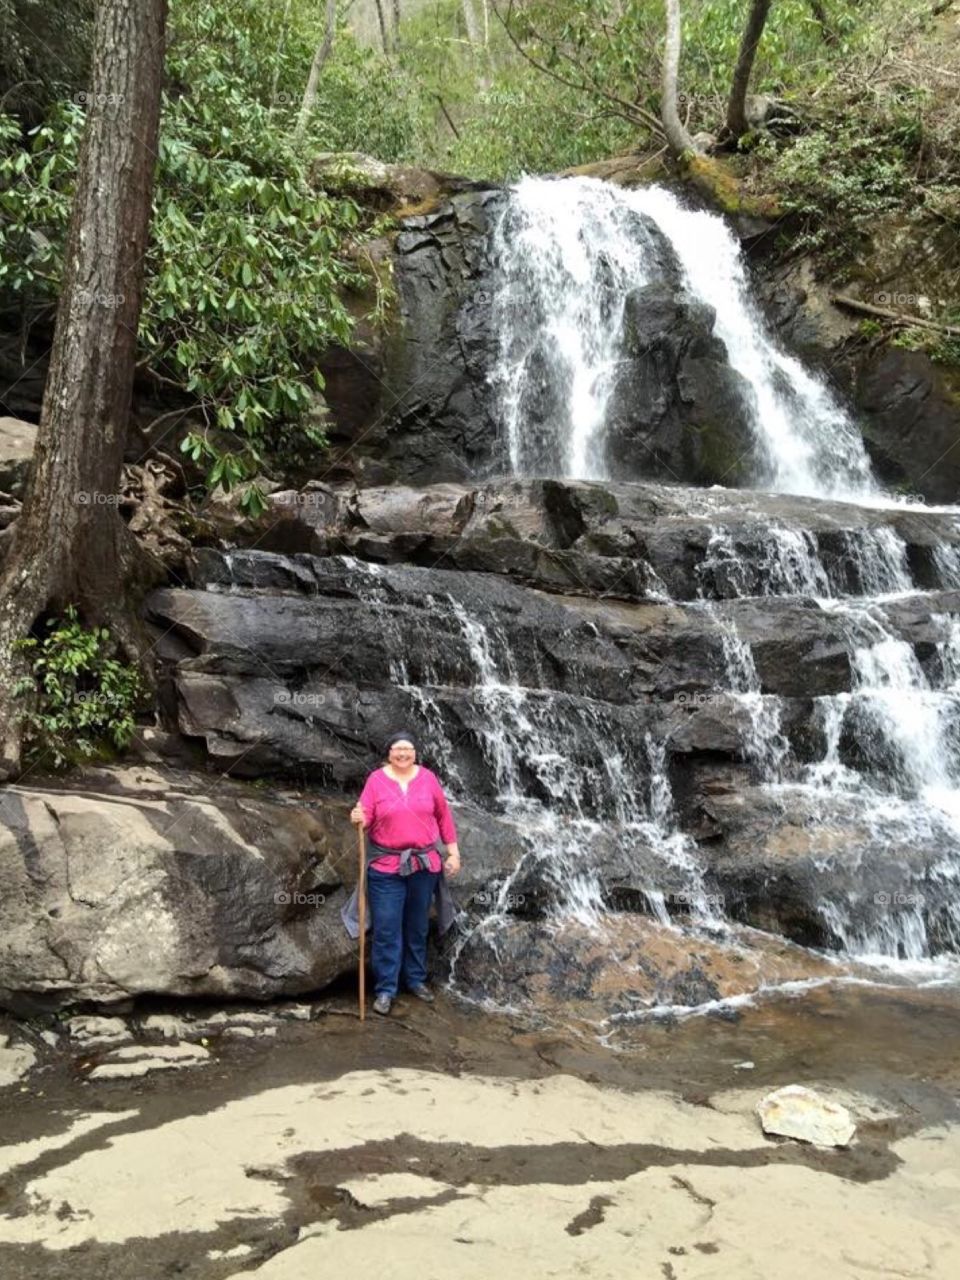 Cancer survivor : Ovarian cancer survivor celebrating remission in Tennessee hiking in mountains to waterfall.